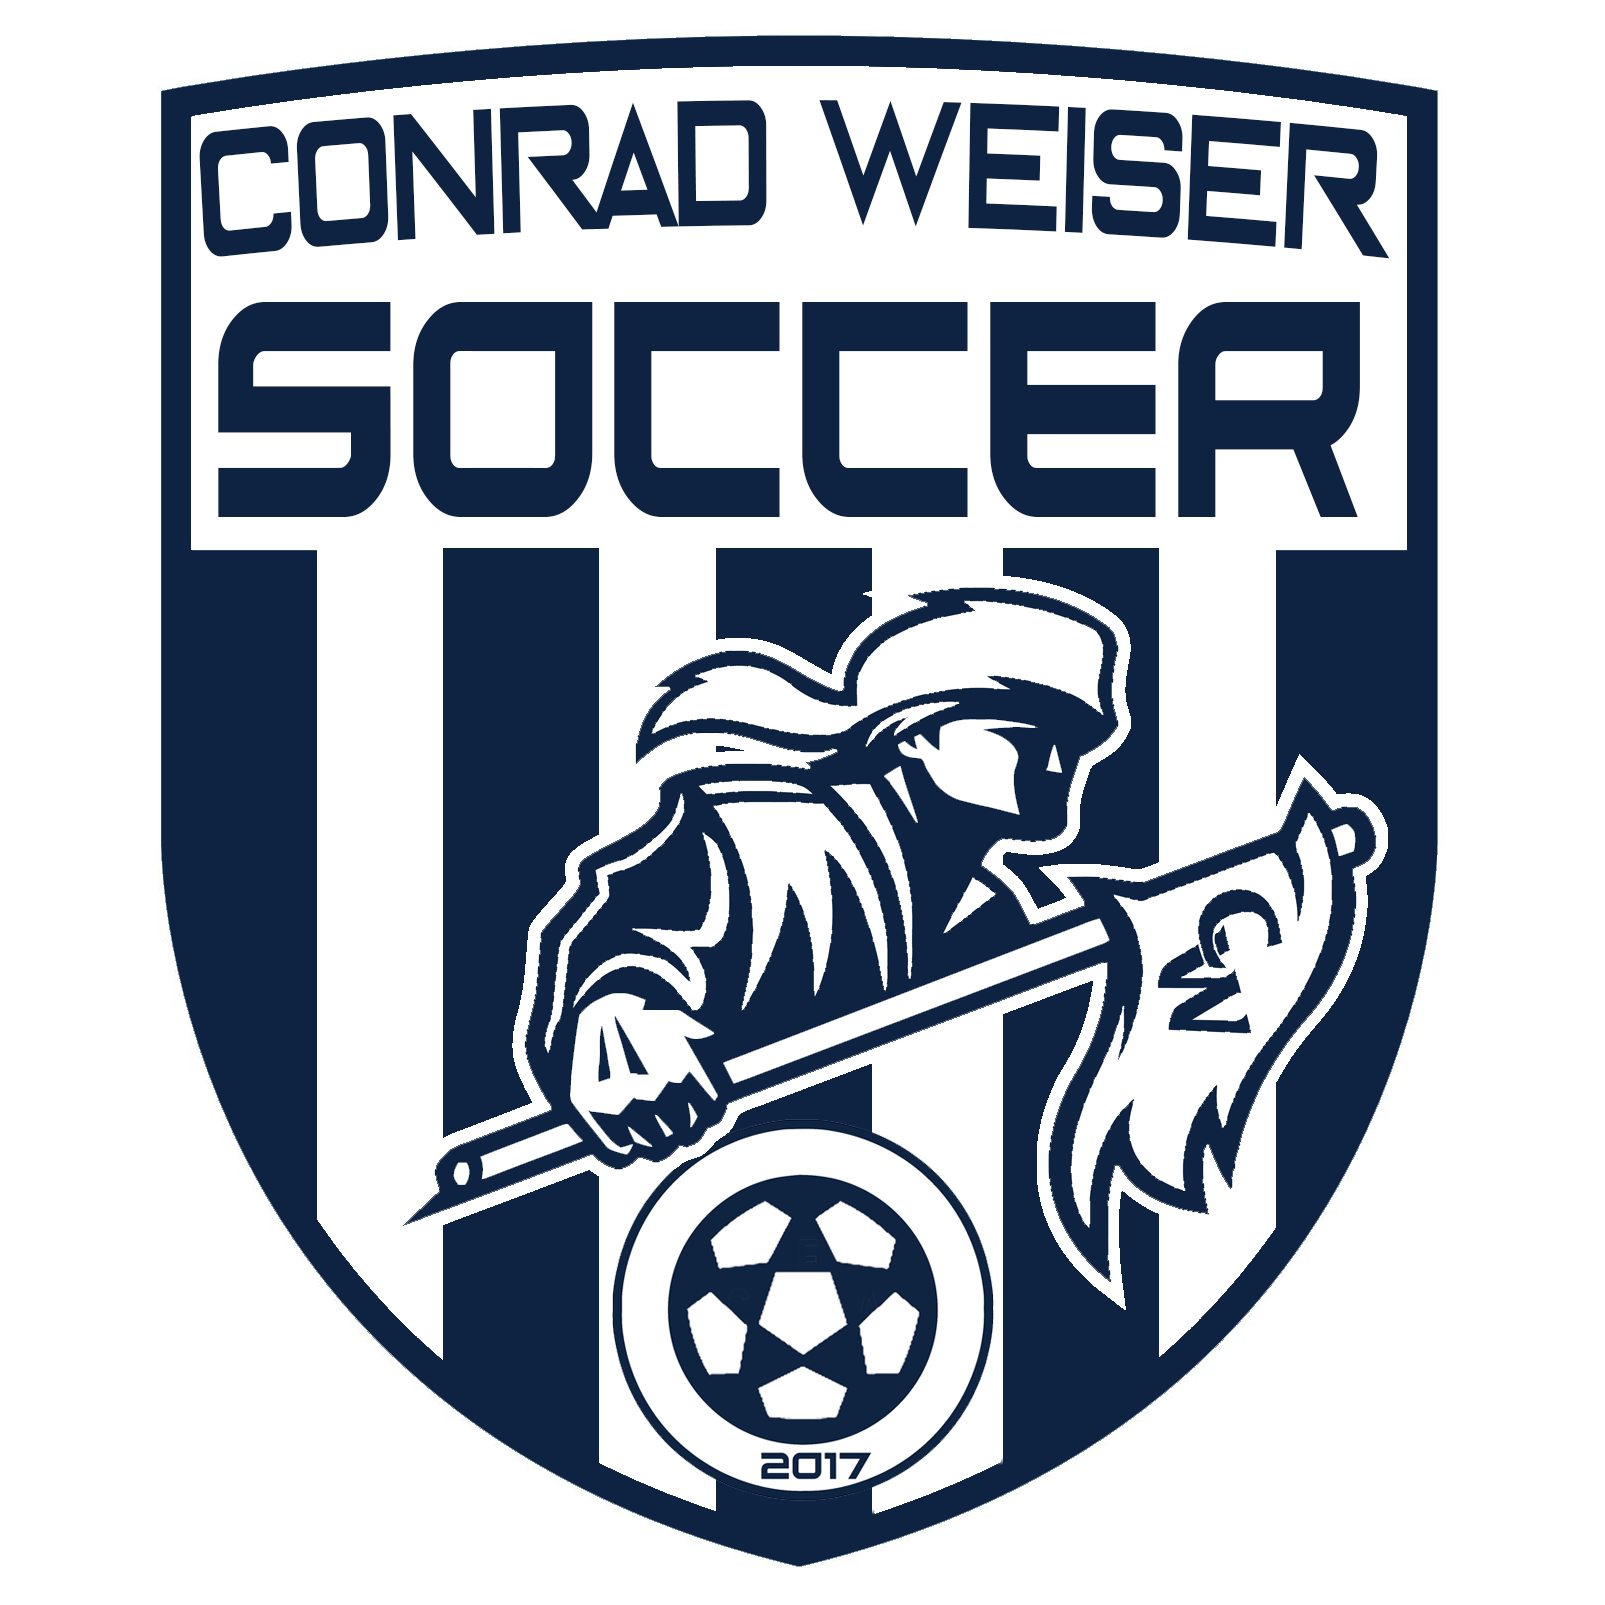 CW Soccer Tee 2017.png